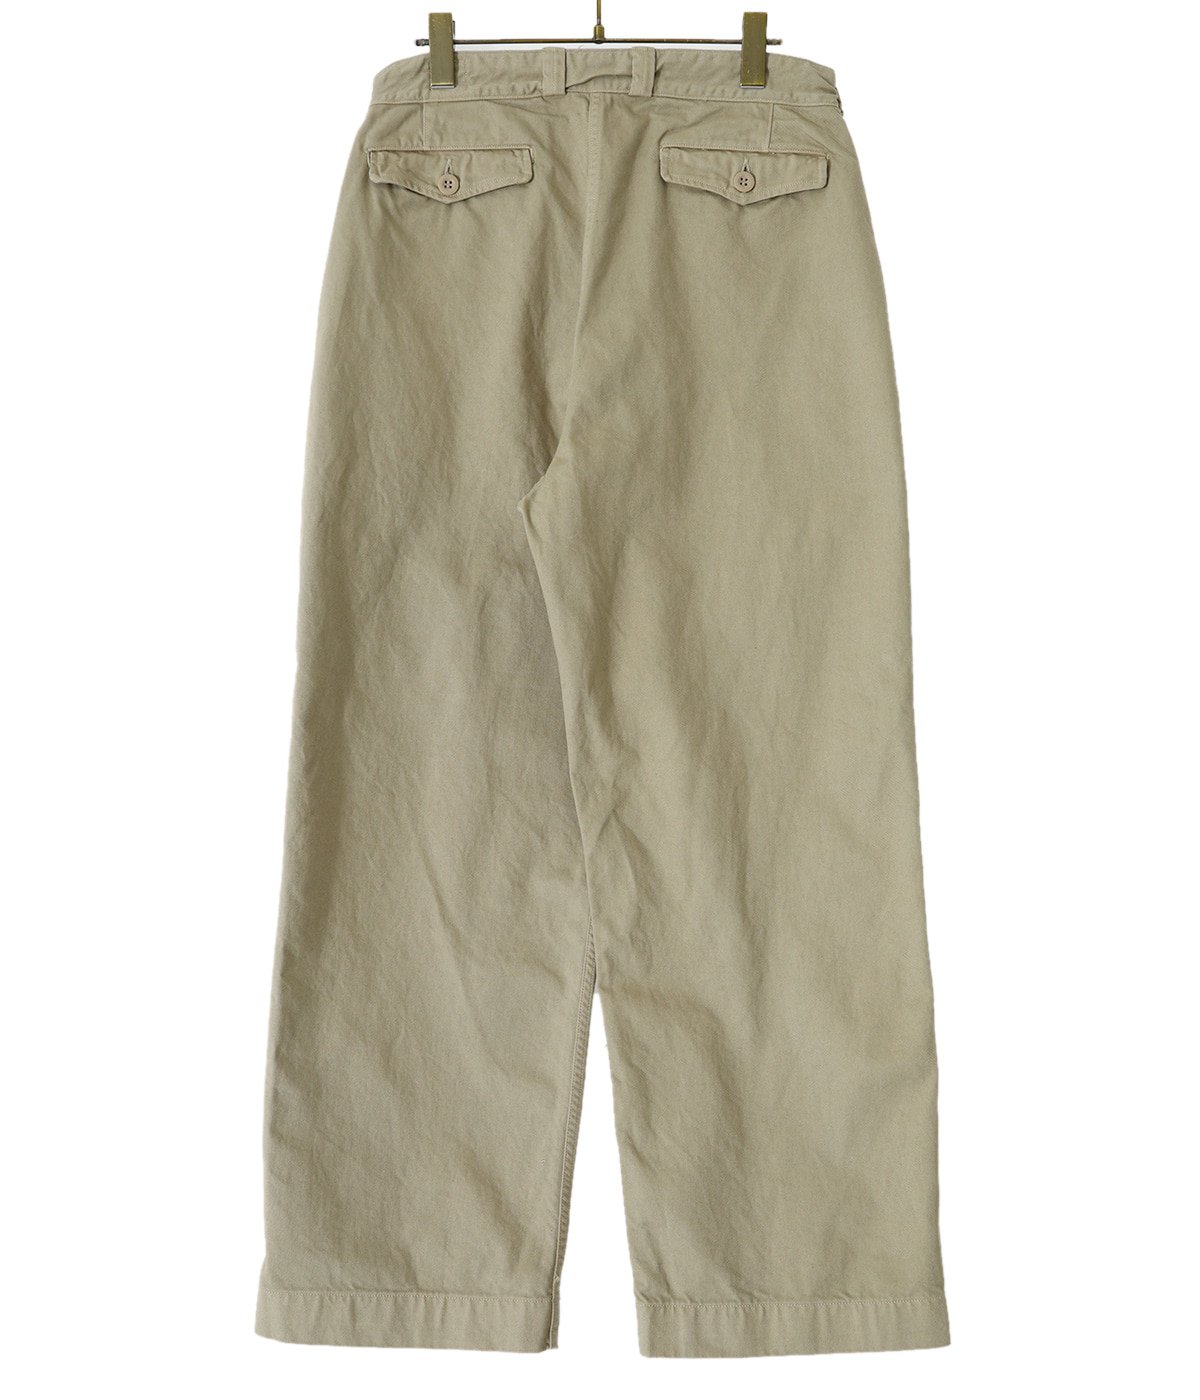 M-52 FRENCH ARMY TROUSER (WIDE FIT)